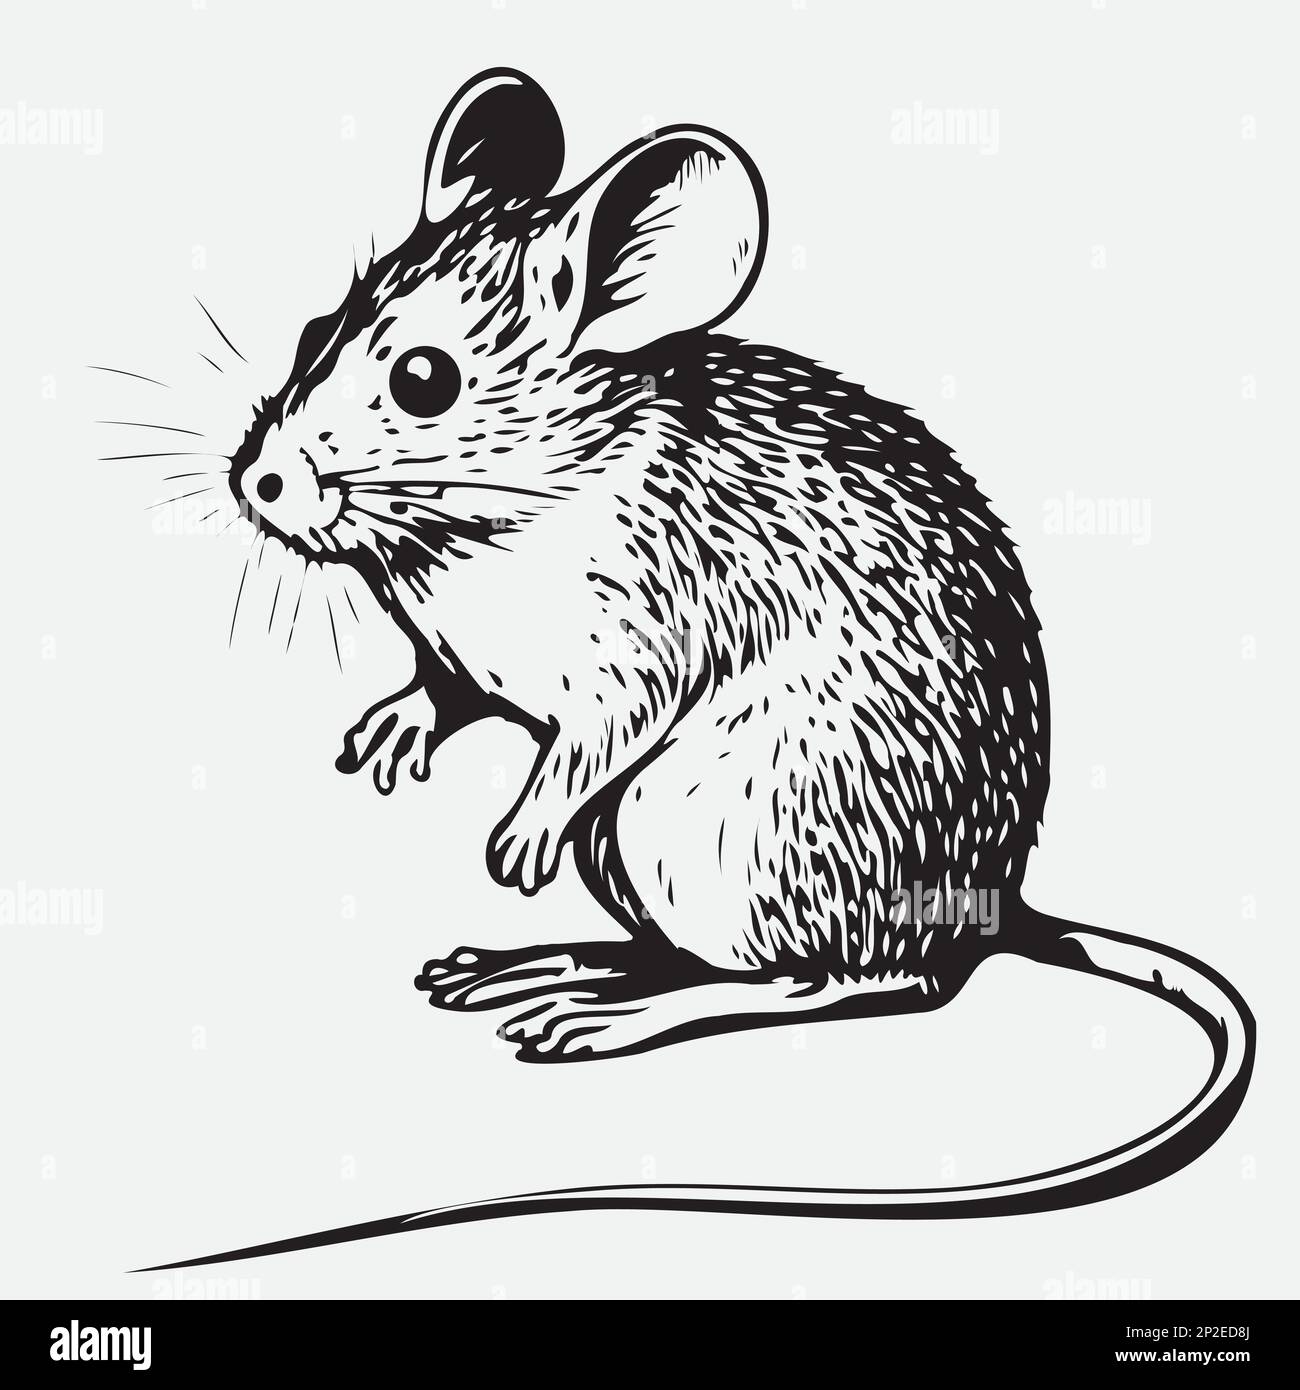 Hand drawn mouse or rat. Sketch, vector illustration. Stock Vector